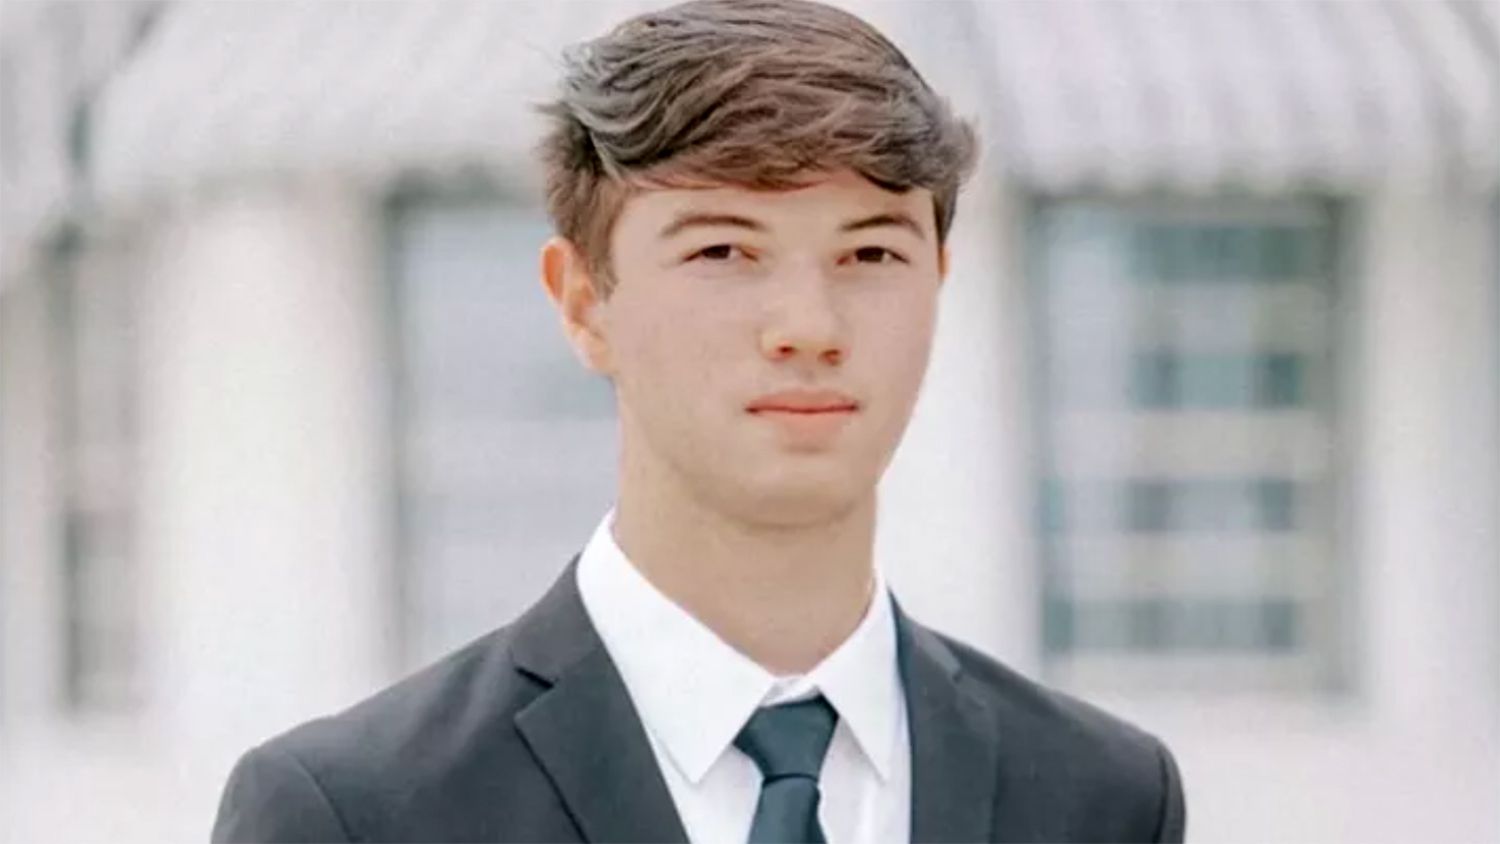 17-Year-Old Alabama High School Student Dies After Being Electrocuted in Car Crash